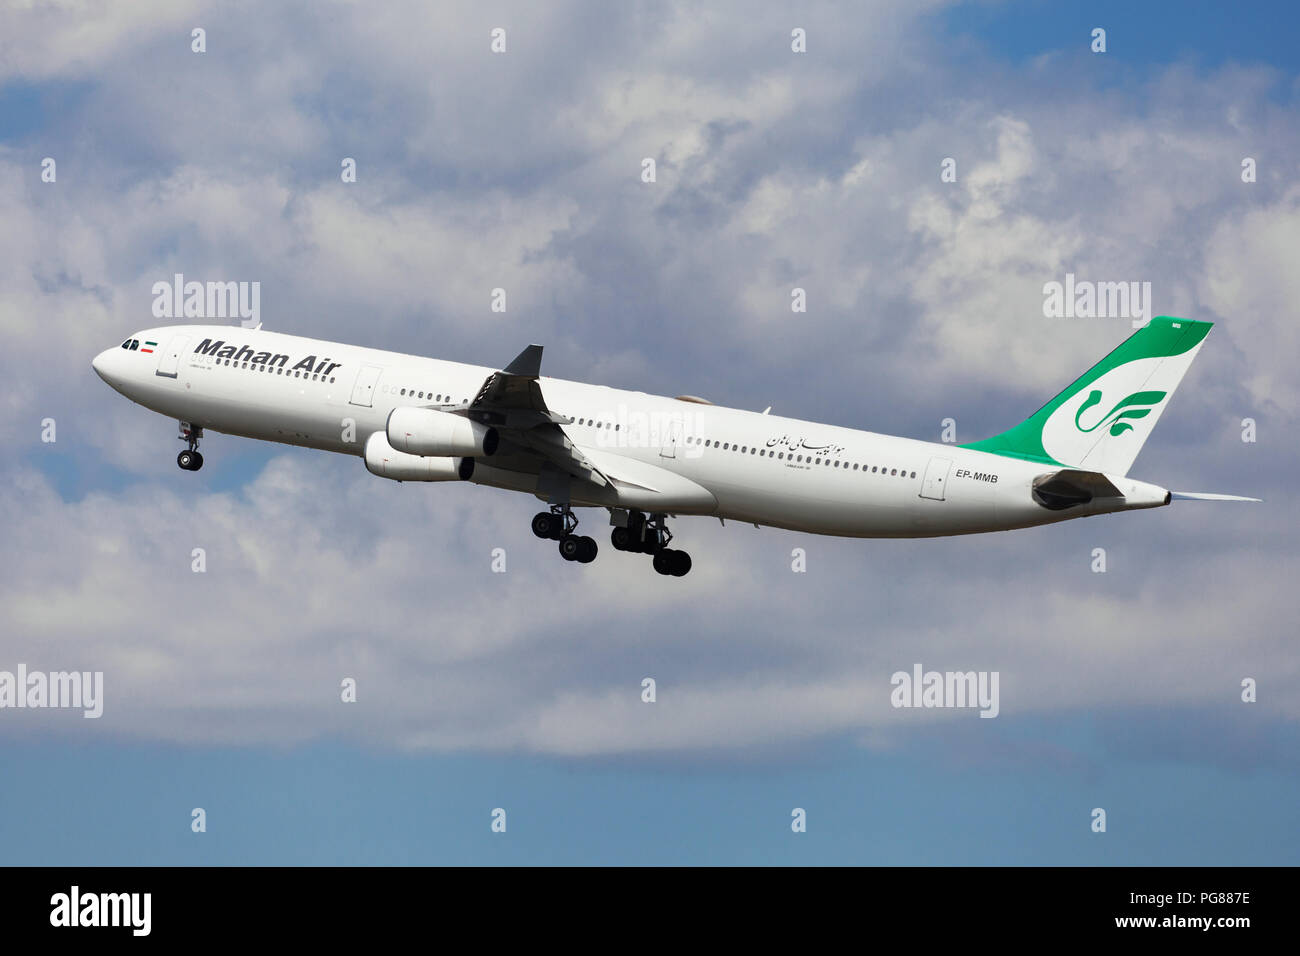 Barcelona, Spain - August 15, 2018: Mahan Air Airbus A340-300 taking off from El Prat Airport in Barcelona, Spain. Stock Photo